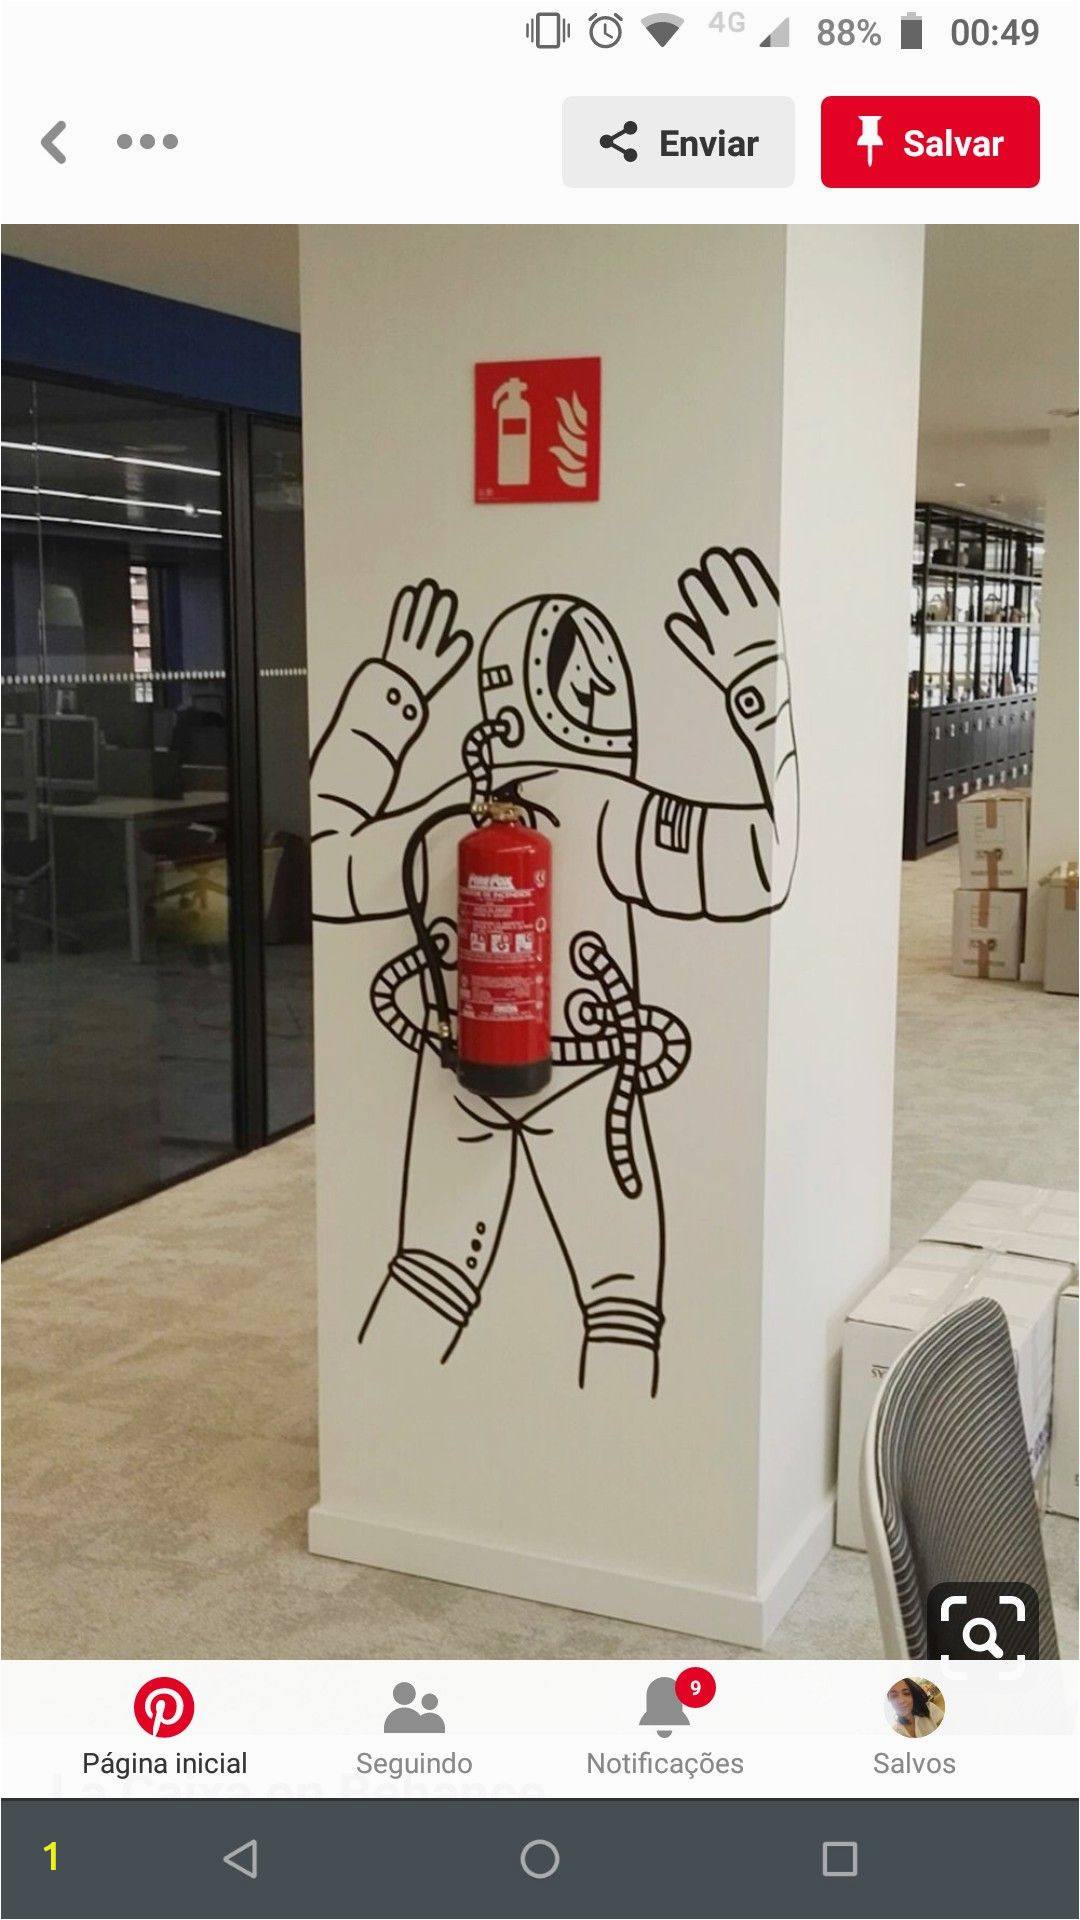 Cool Office Wall Murals Pin by Sumsky On åæ In 2019